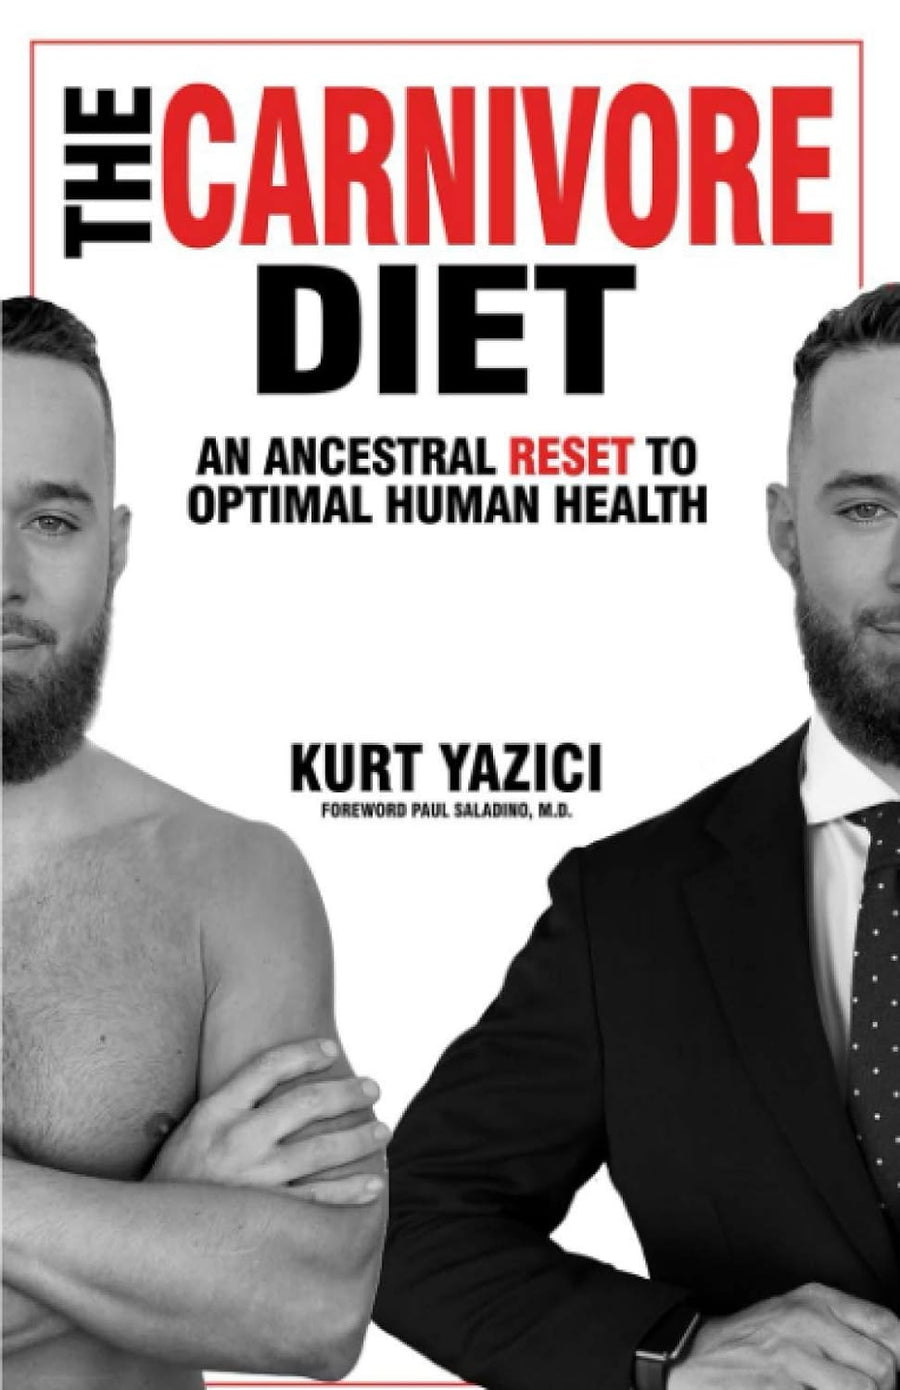 The Carnivore Diet: An Ancestral Reset to Optimal Human Health - Love Low Carb